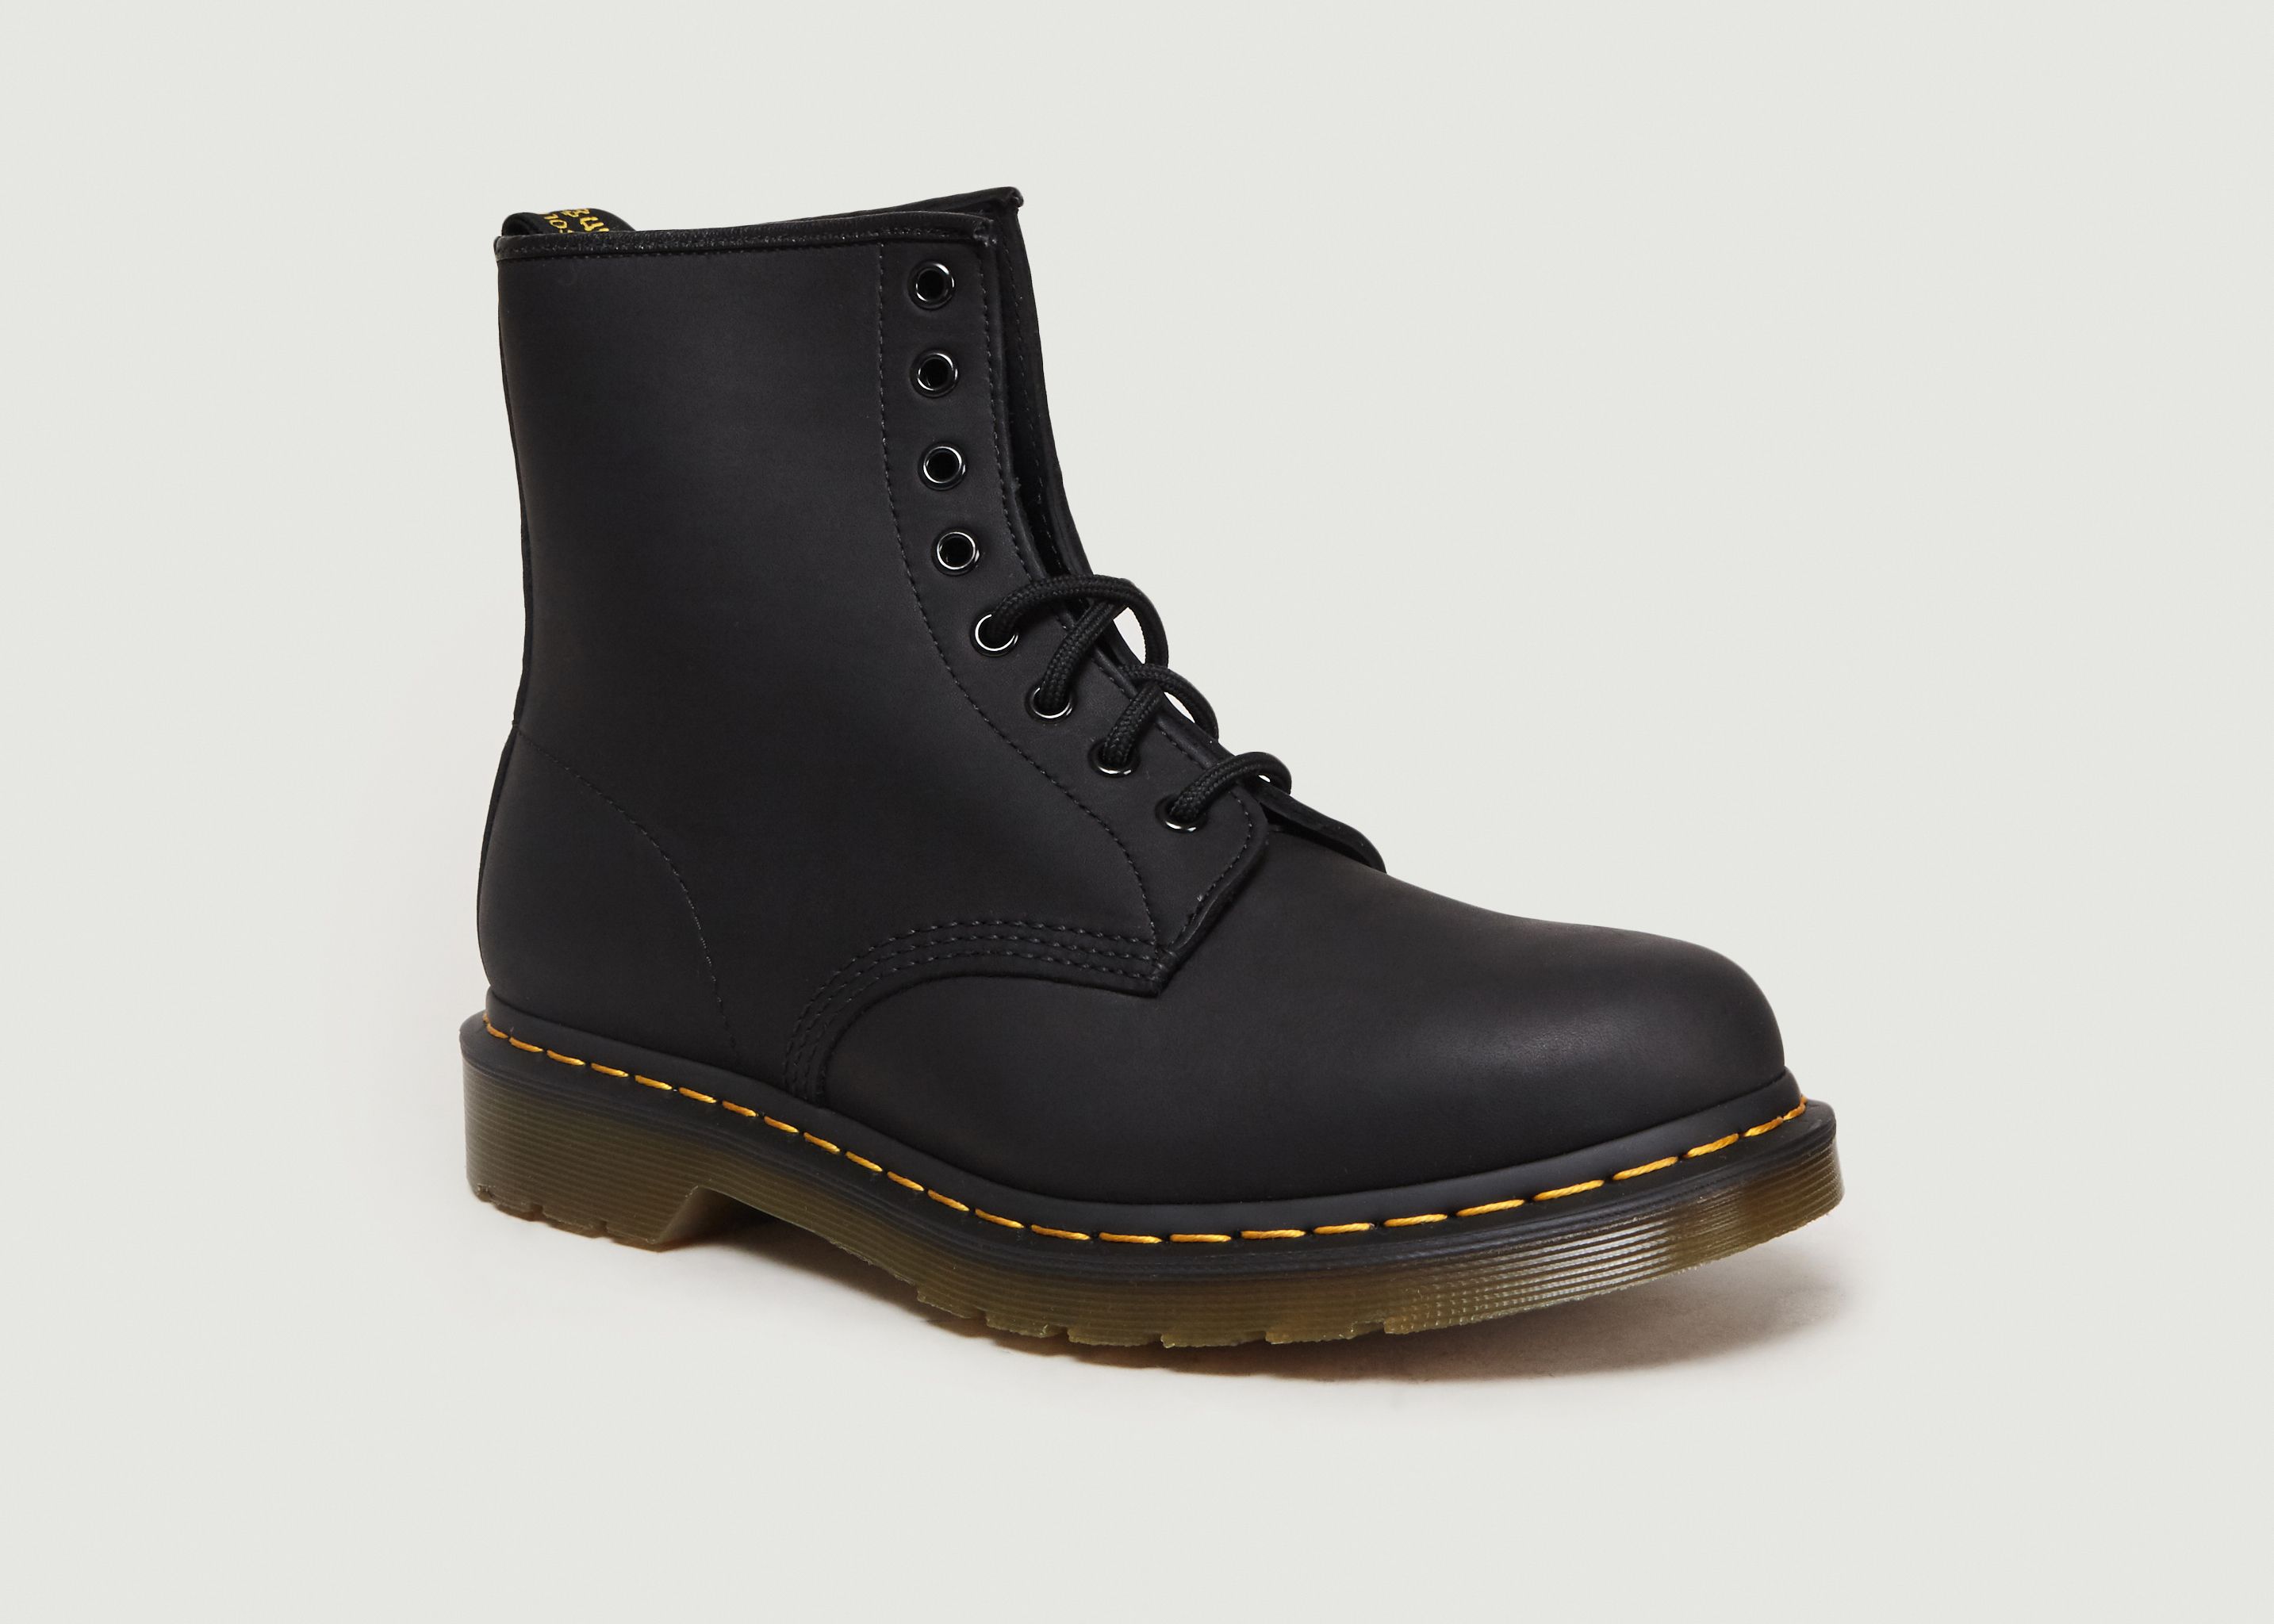 1460 Greasy Boots - Dr. Martens